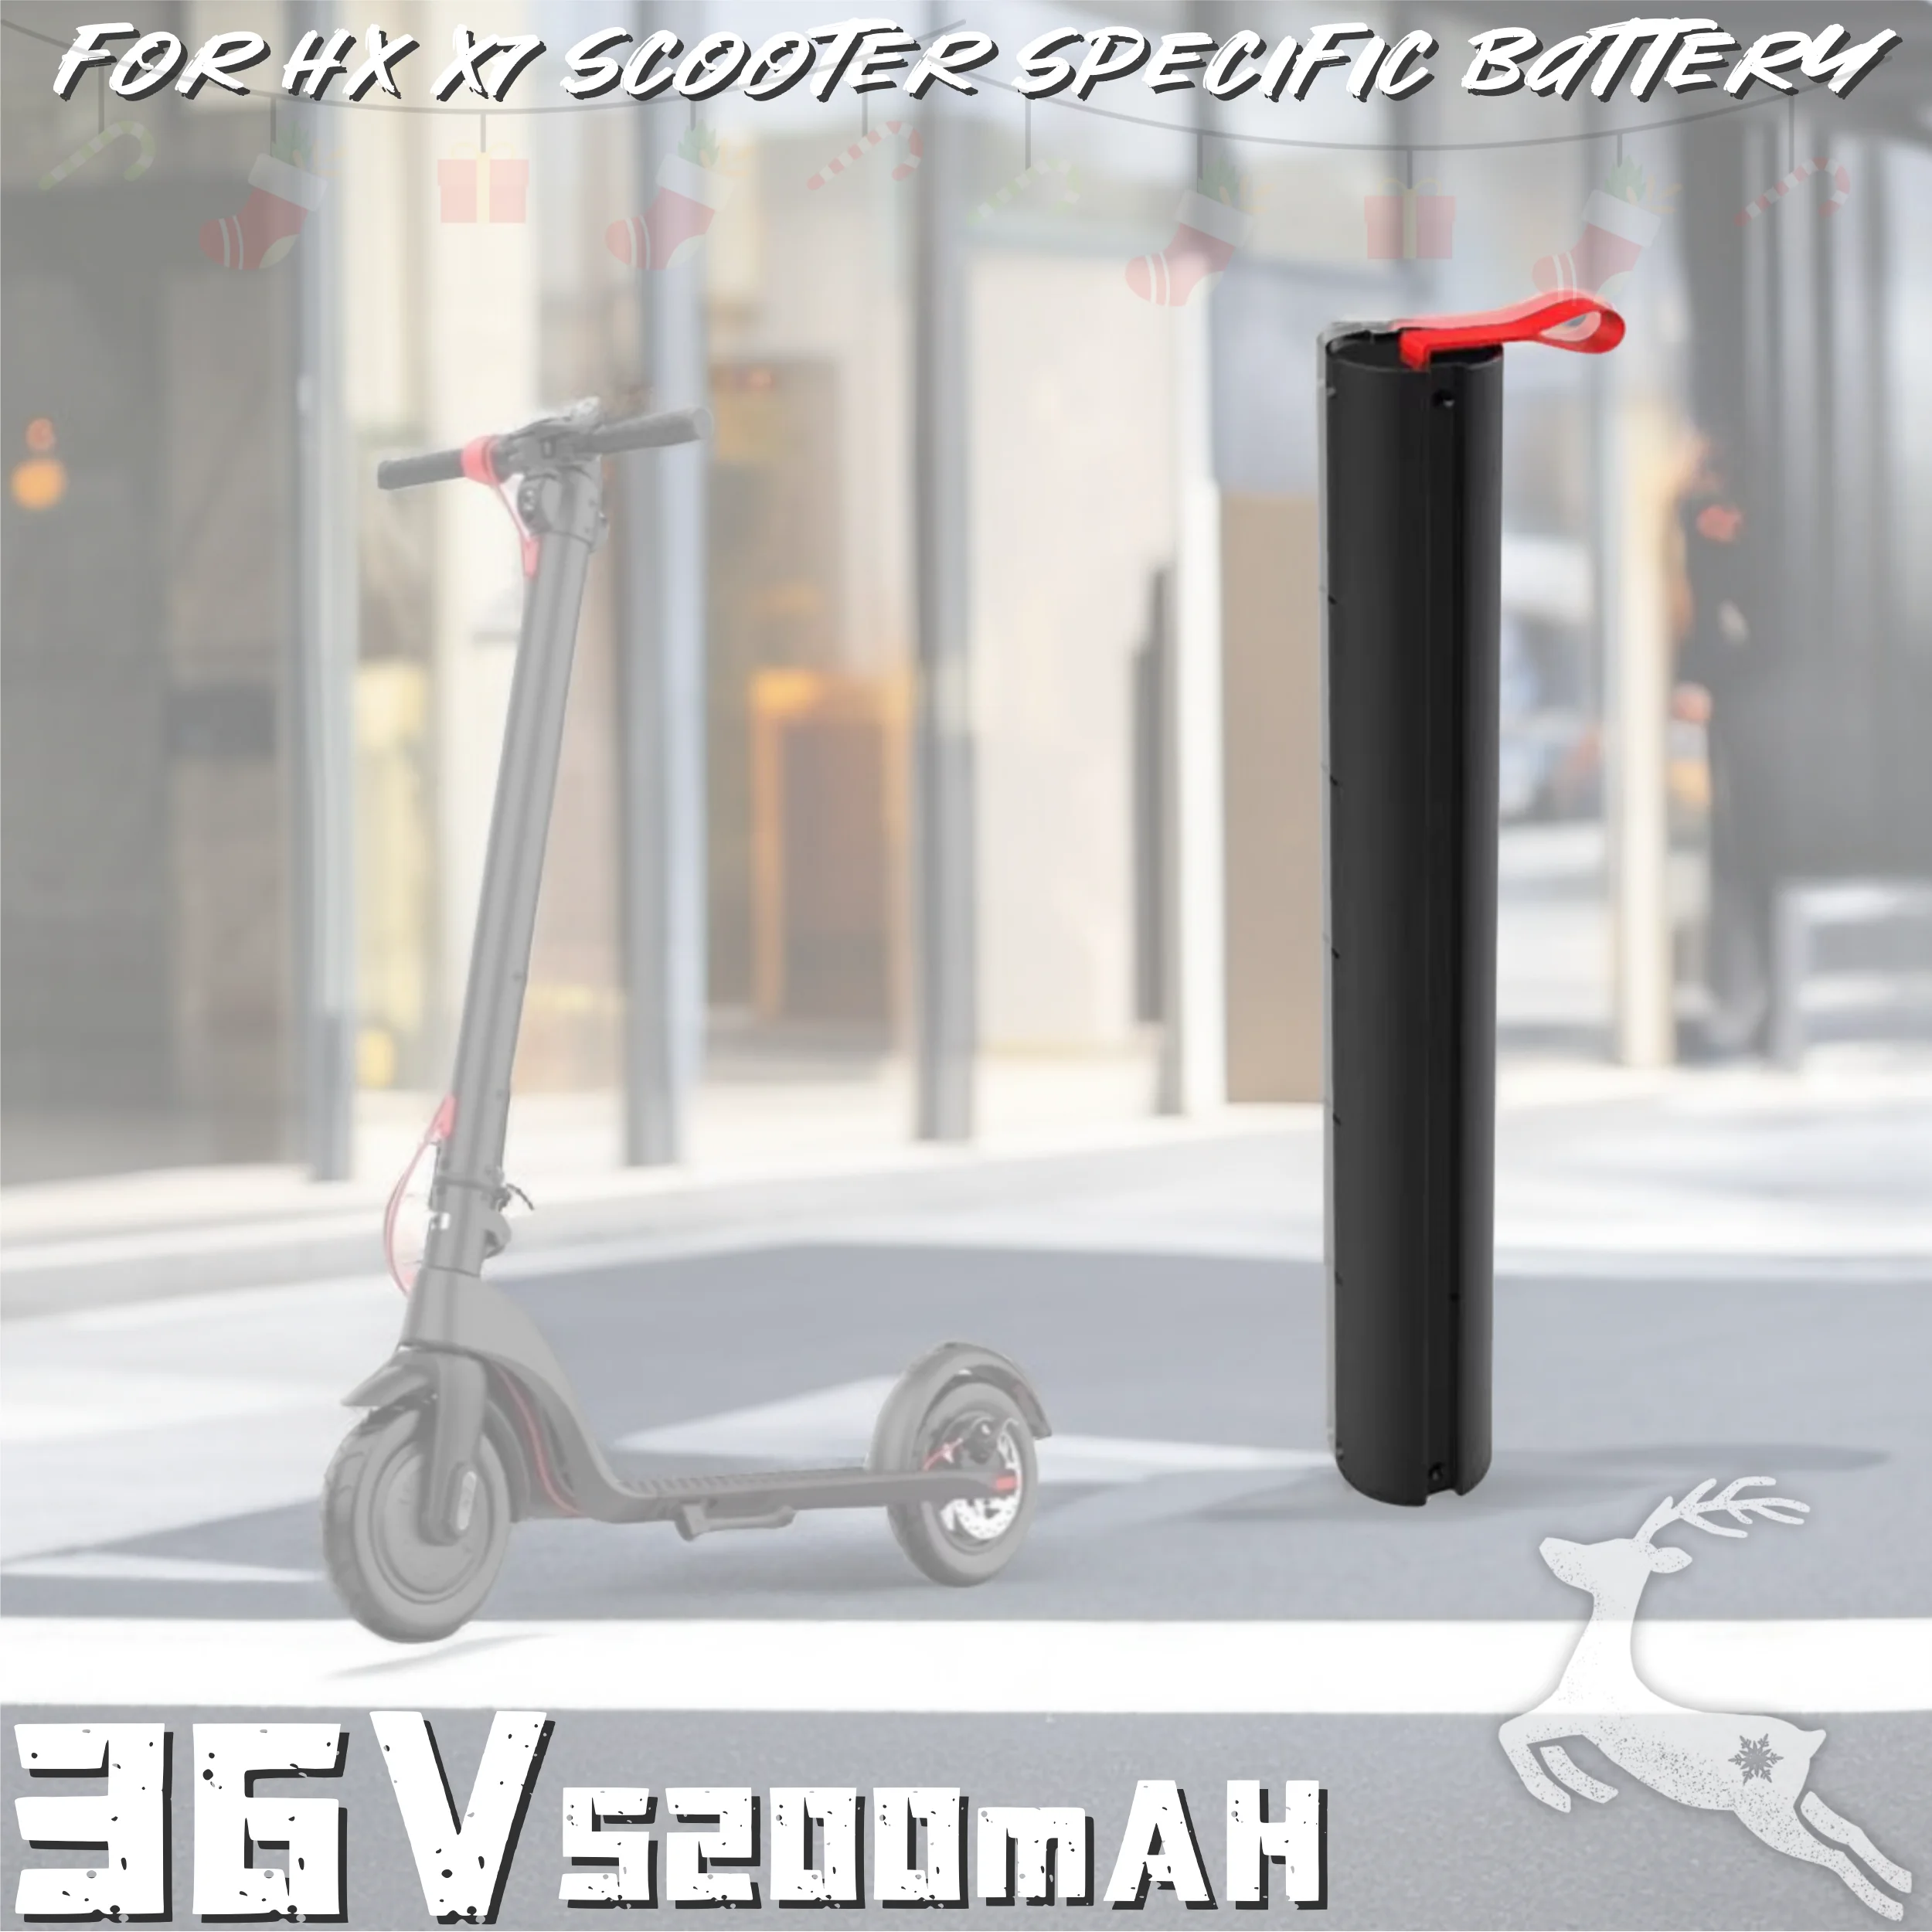 

The brand new X7 scooter has a 36V, 5.2 AH, MBS rechargeable lithium battery that can be applied to the for HX X7 scooter.